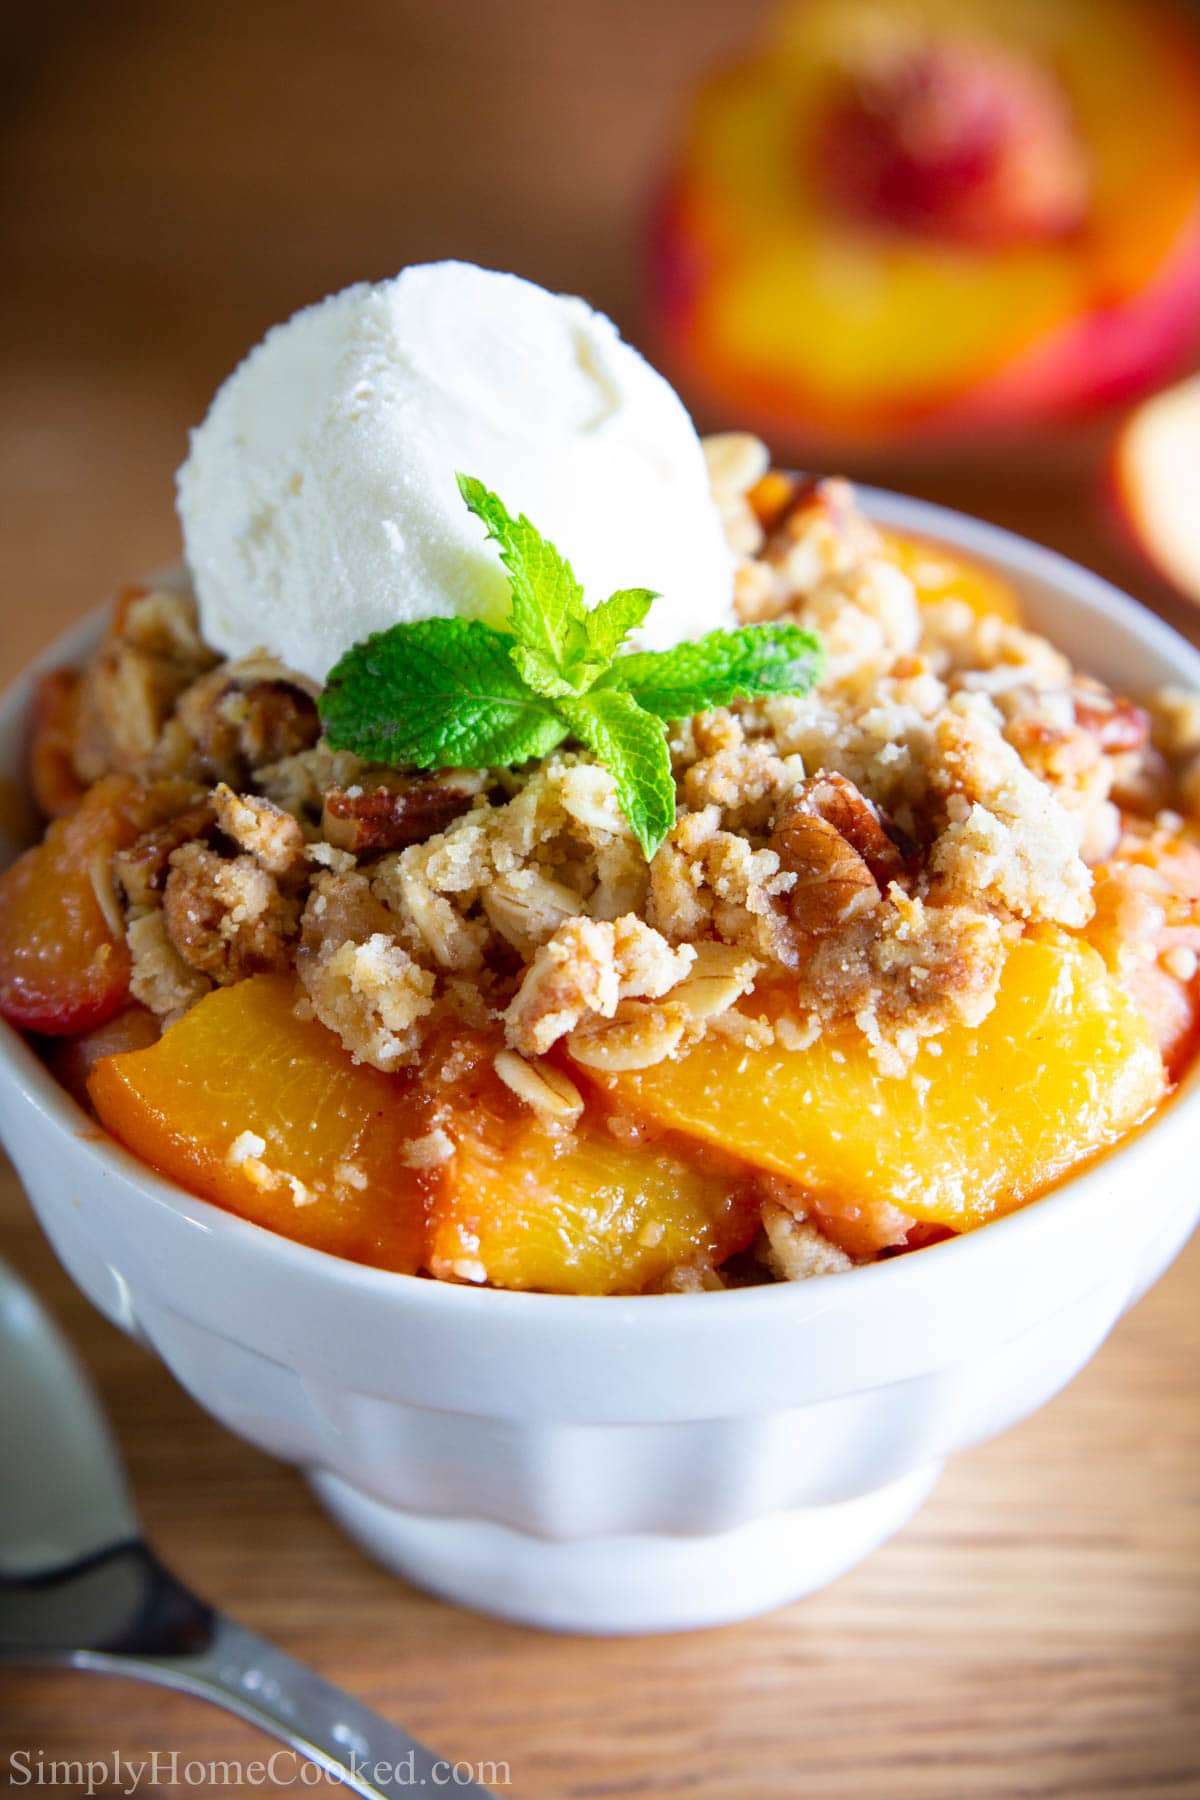 Peach Crisp in a white bowl with a scoop of vanilla ice cream on top with a mint leaf